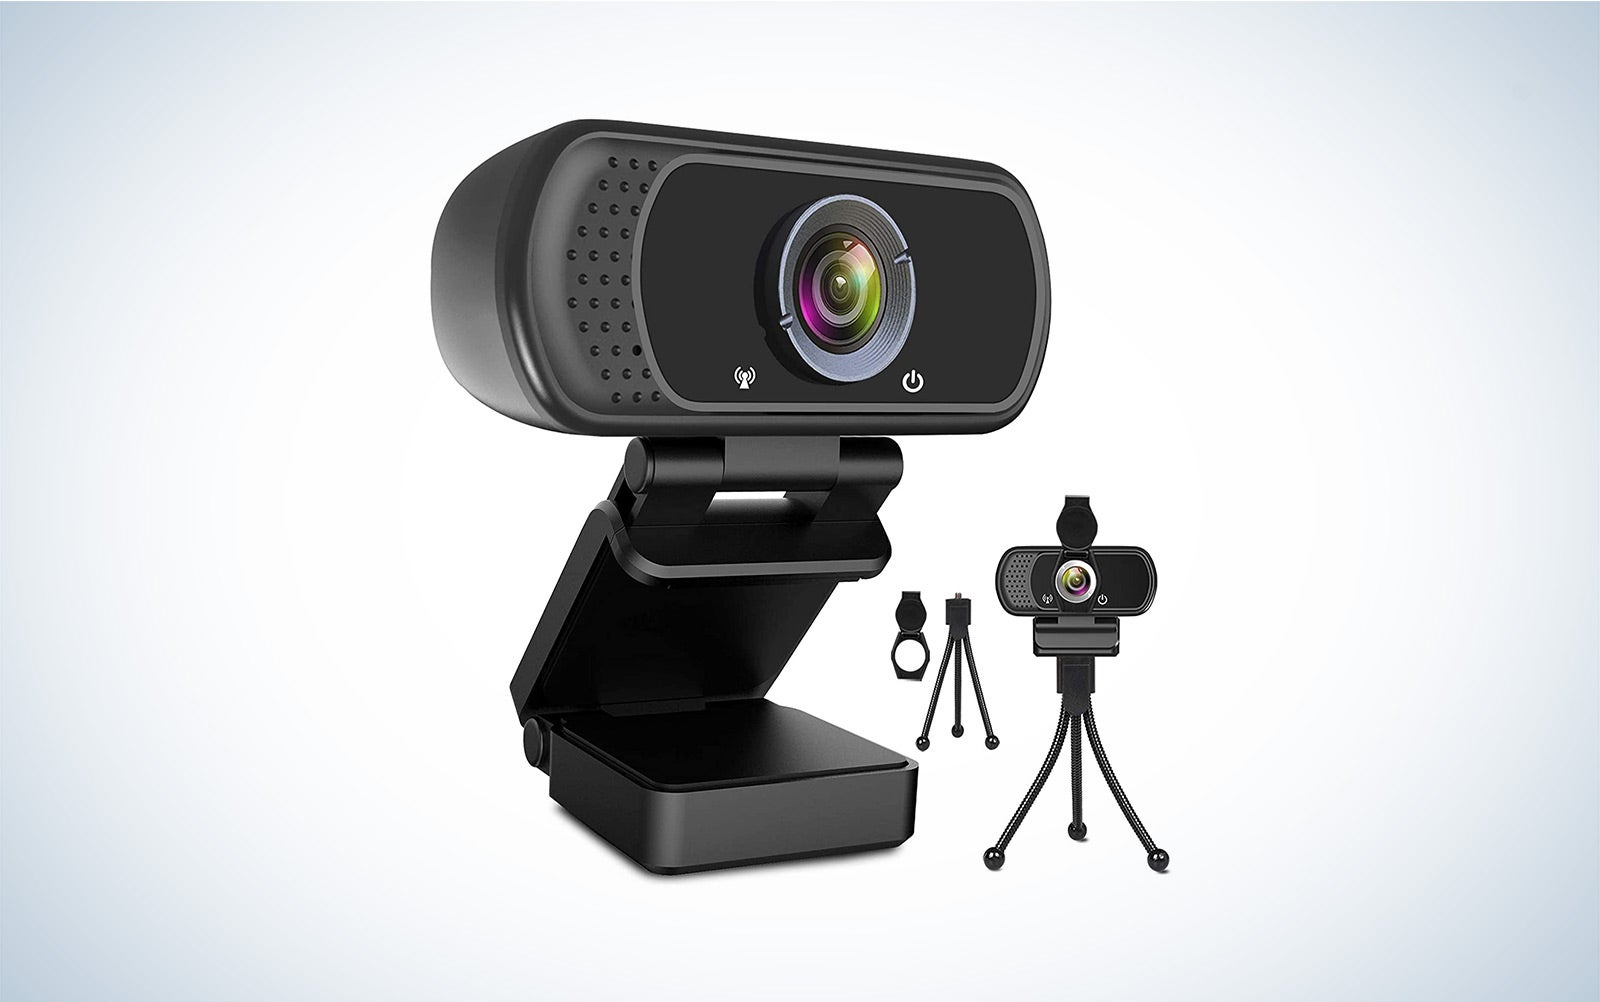 The ToLuLu Webcam HD 1080p Web Camera is the best camera for streaming on a budget.